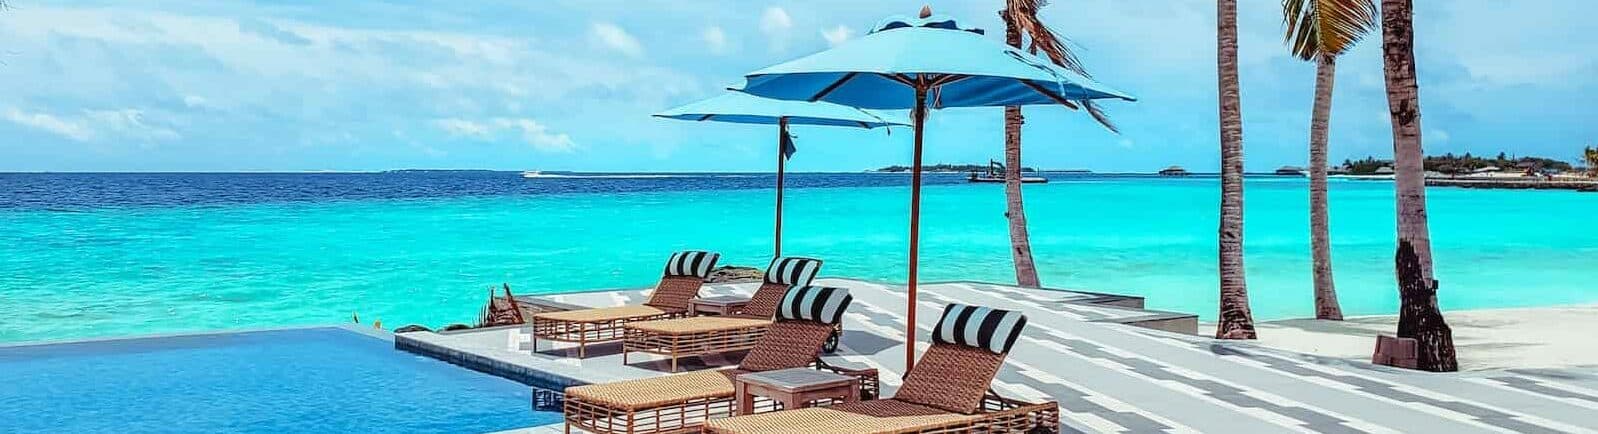 brown wooden lounge chairs on beach during daytime